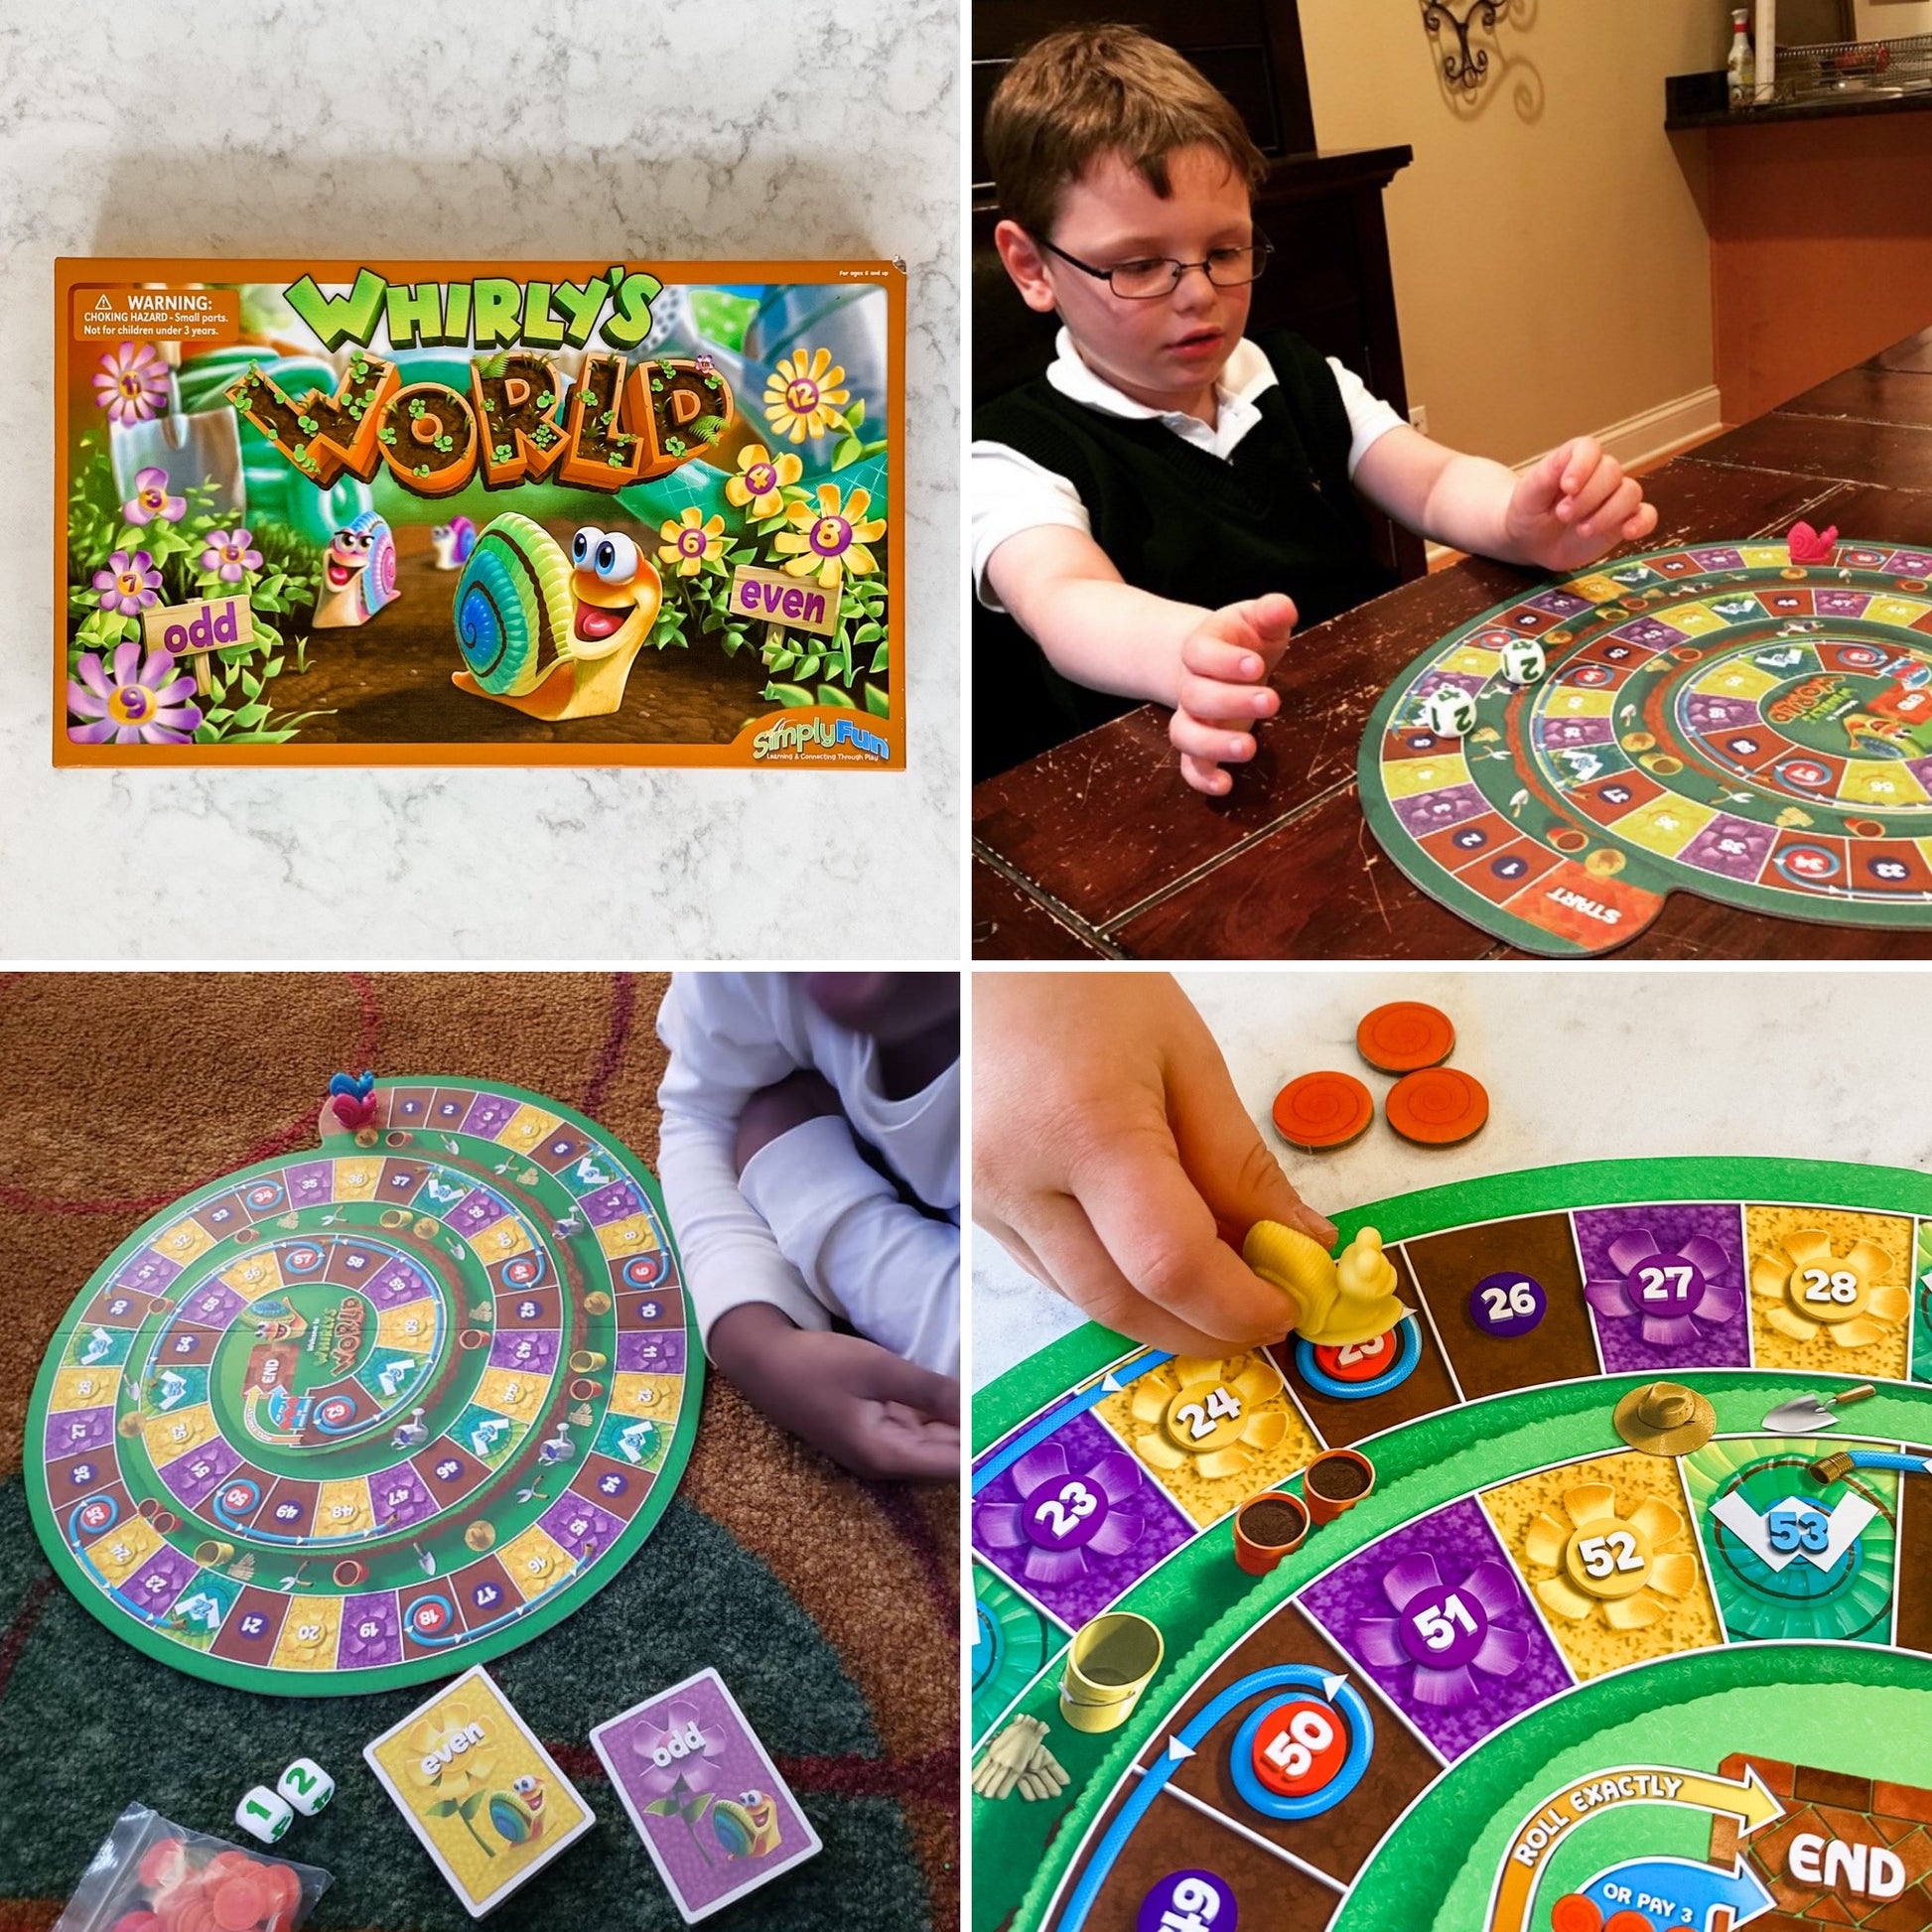 Whirly's World - basic math board game for counting